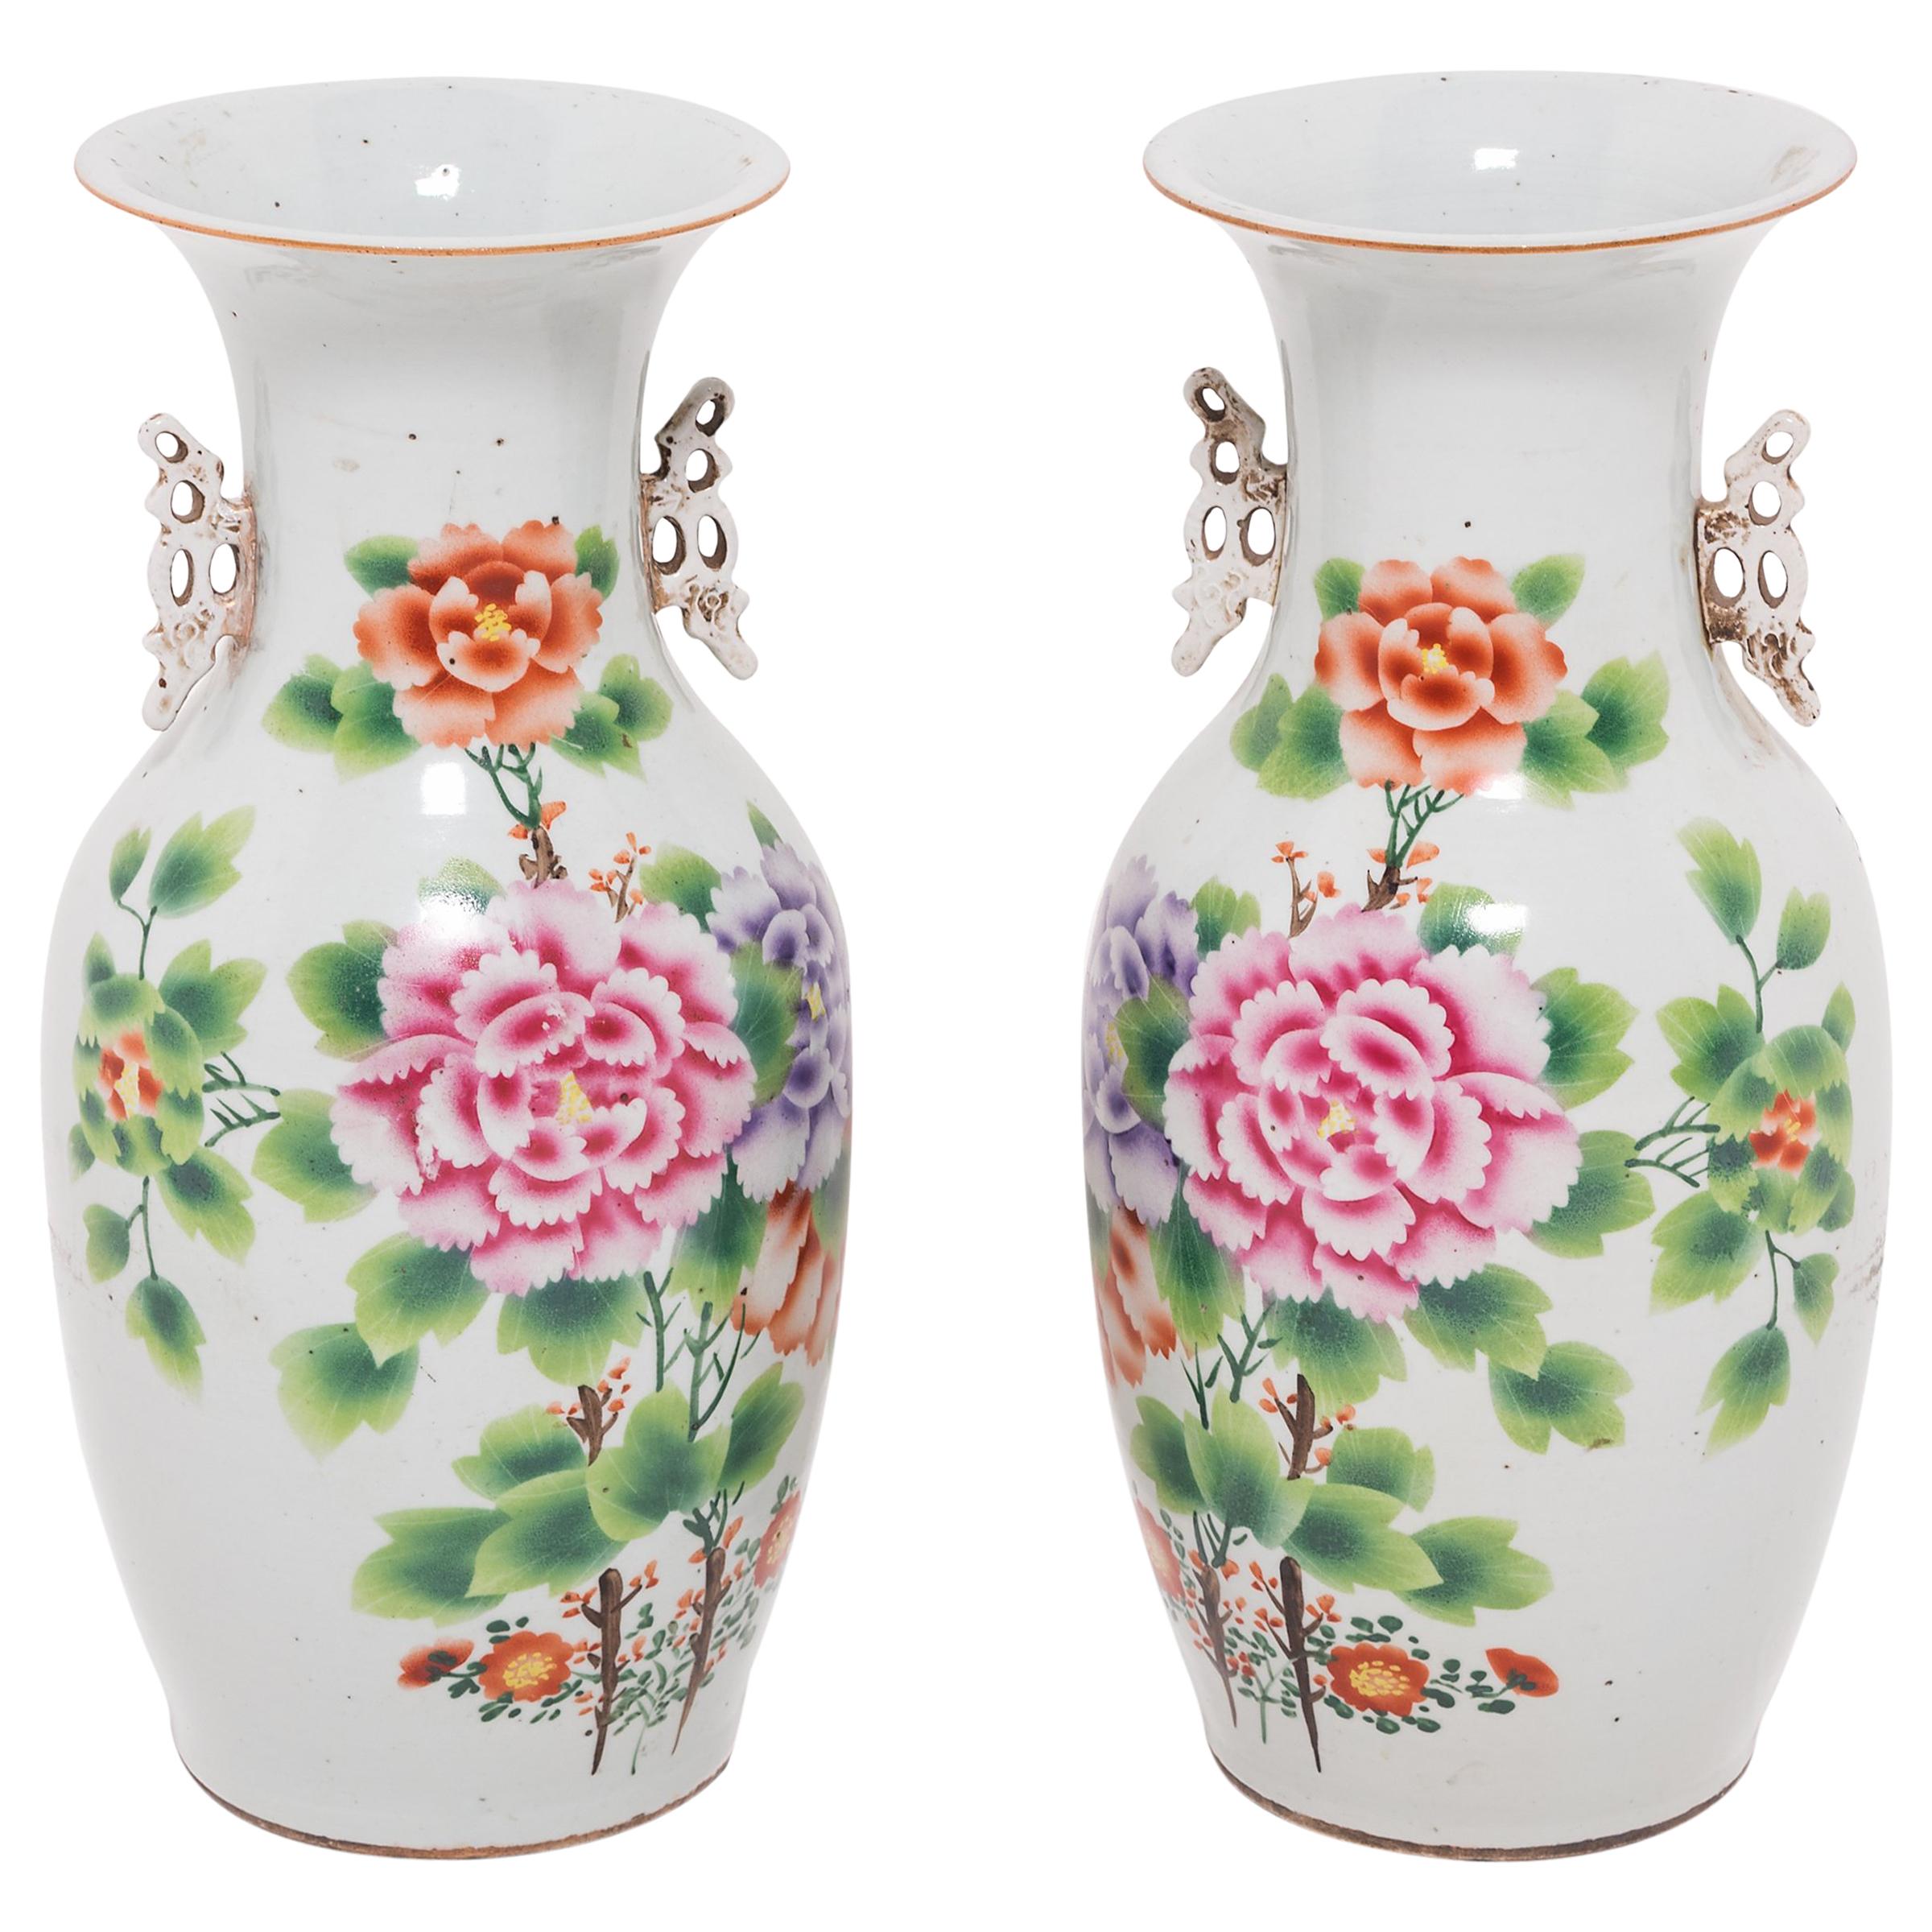 Pair of Chinese Peony Fantail Vases, c. 1920s